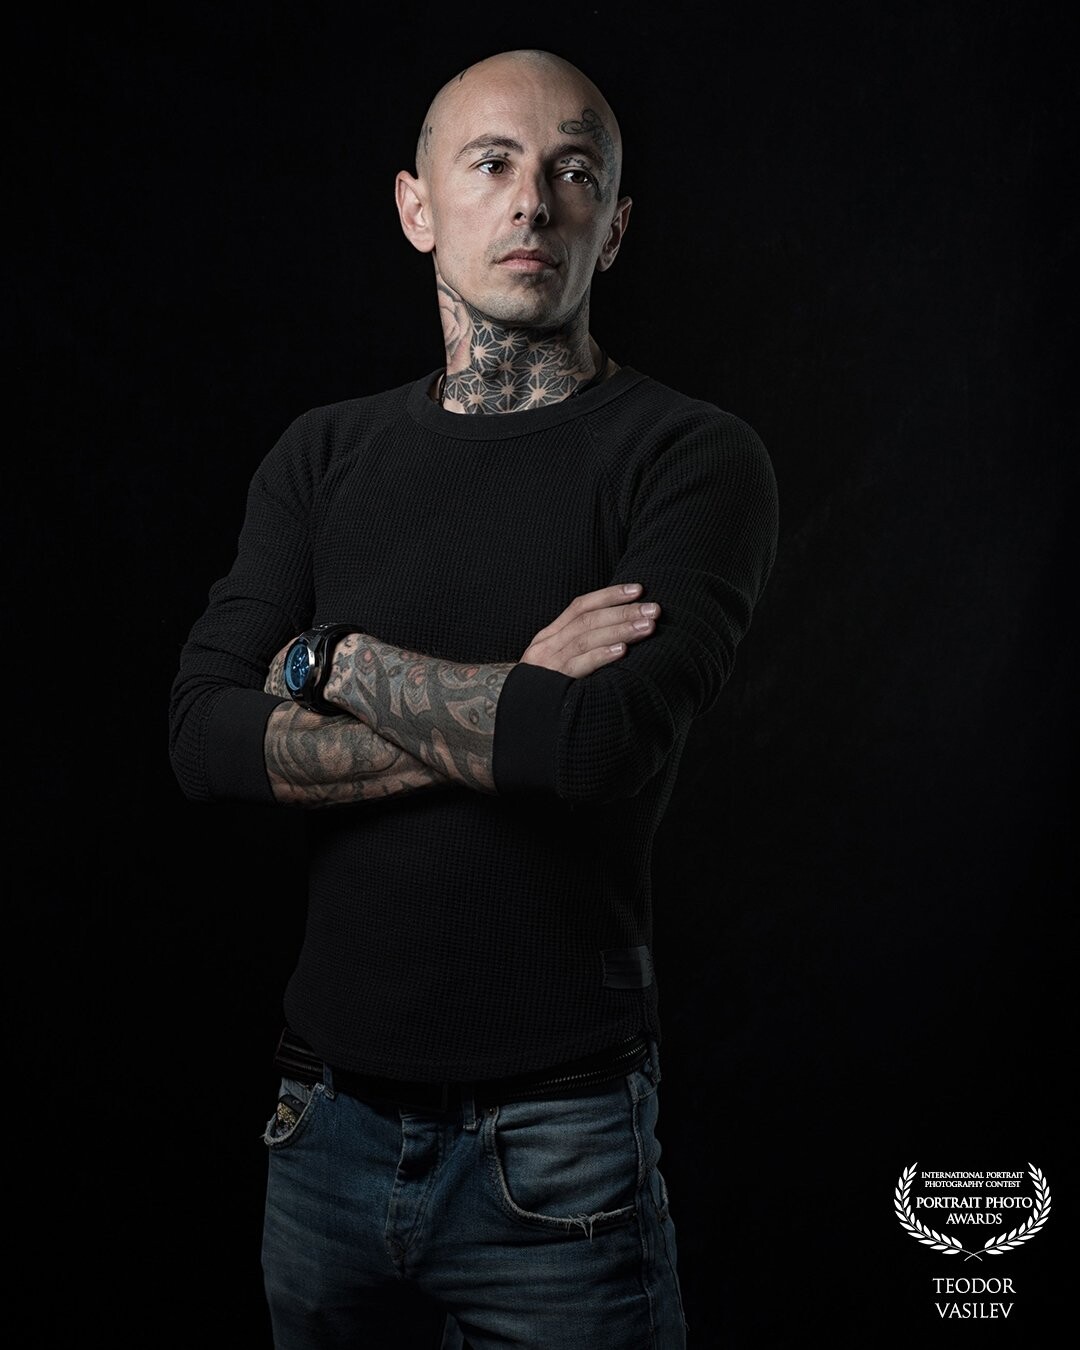 Master tattoo artist Julian Angelov from Pleven, Bulgaria. A photo from his comercial  photoshoot. Low key portrait, dramatic look as requested by him.